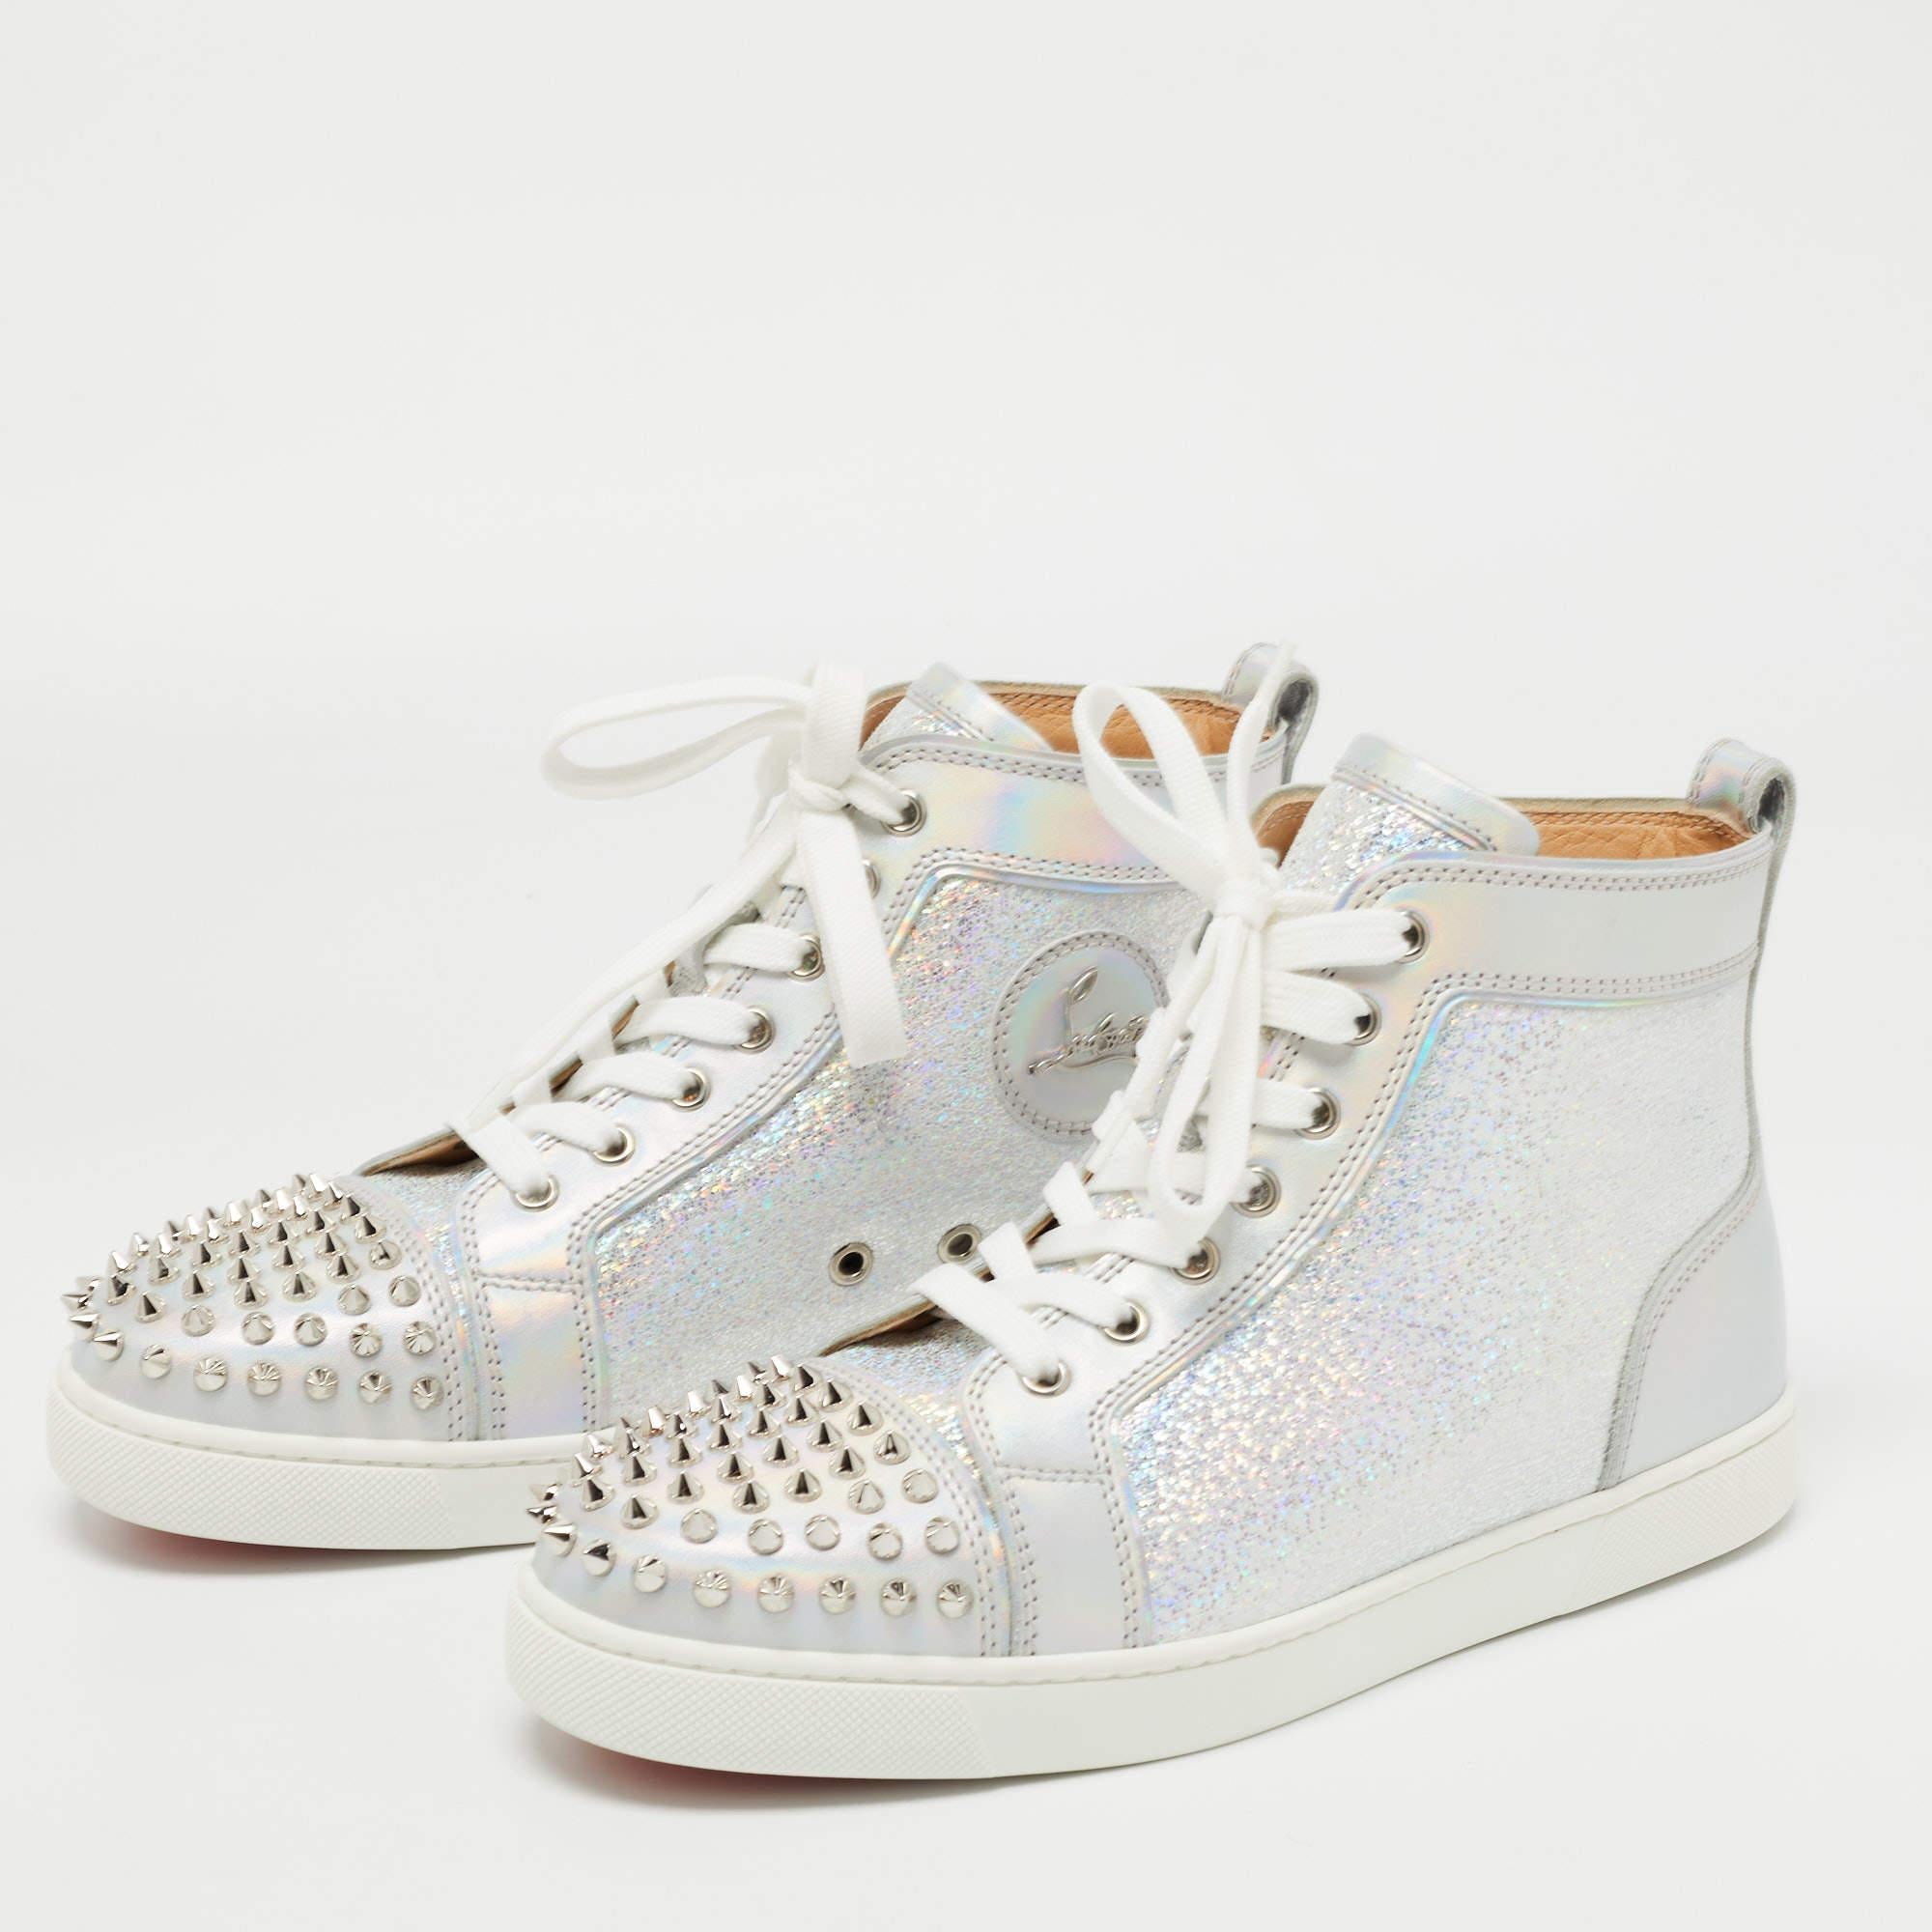 Women's Christian Louboutin Silver Laminated Suede and Leather Lou Spikes High Top Sneak